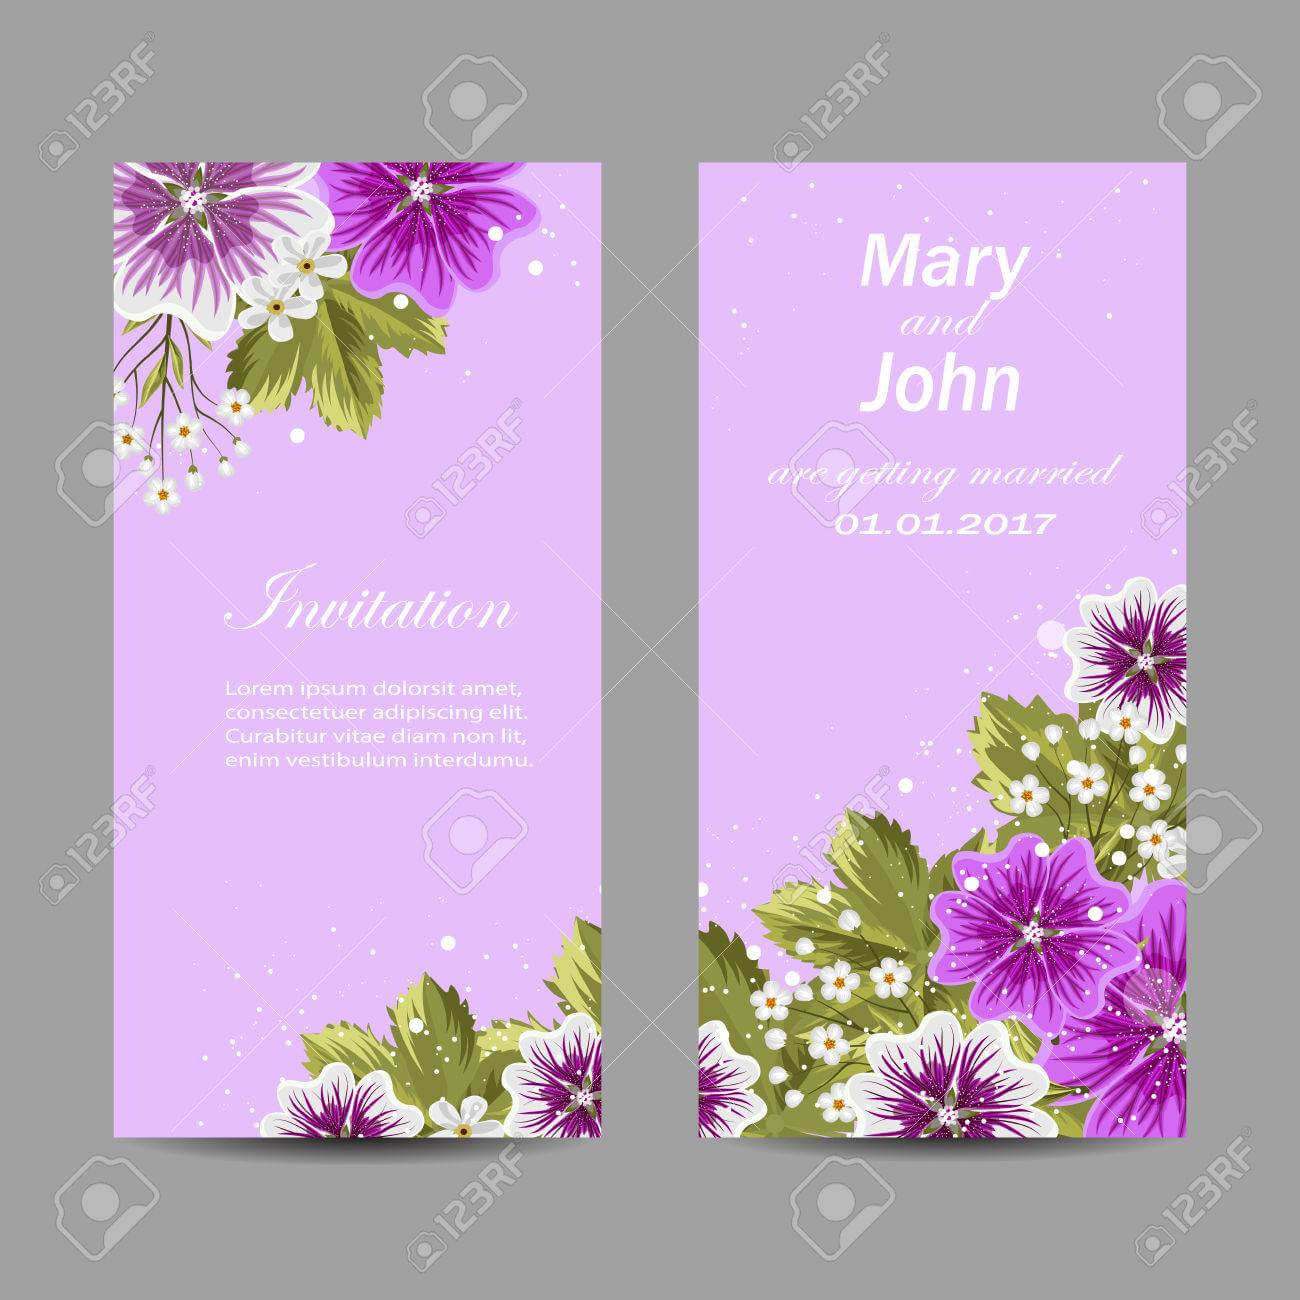 Set Of Wedding Invitation Cards Design. Beautiful Mallow Flowers.. With Invitation Cards Templates For Marriage